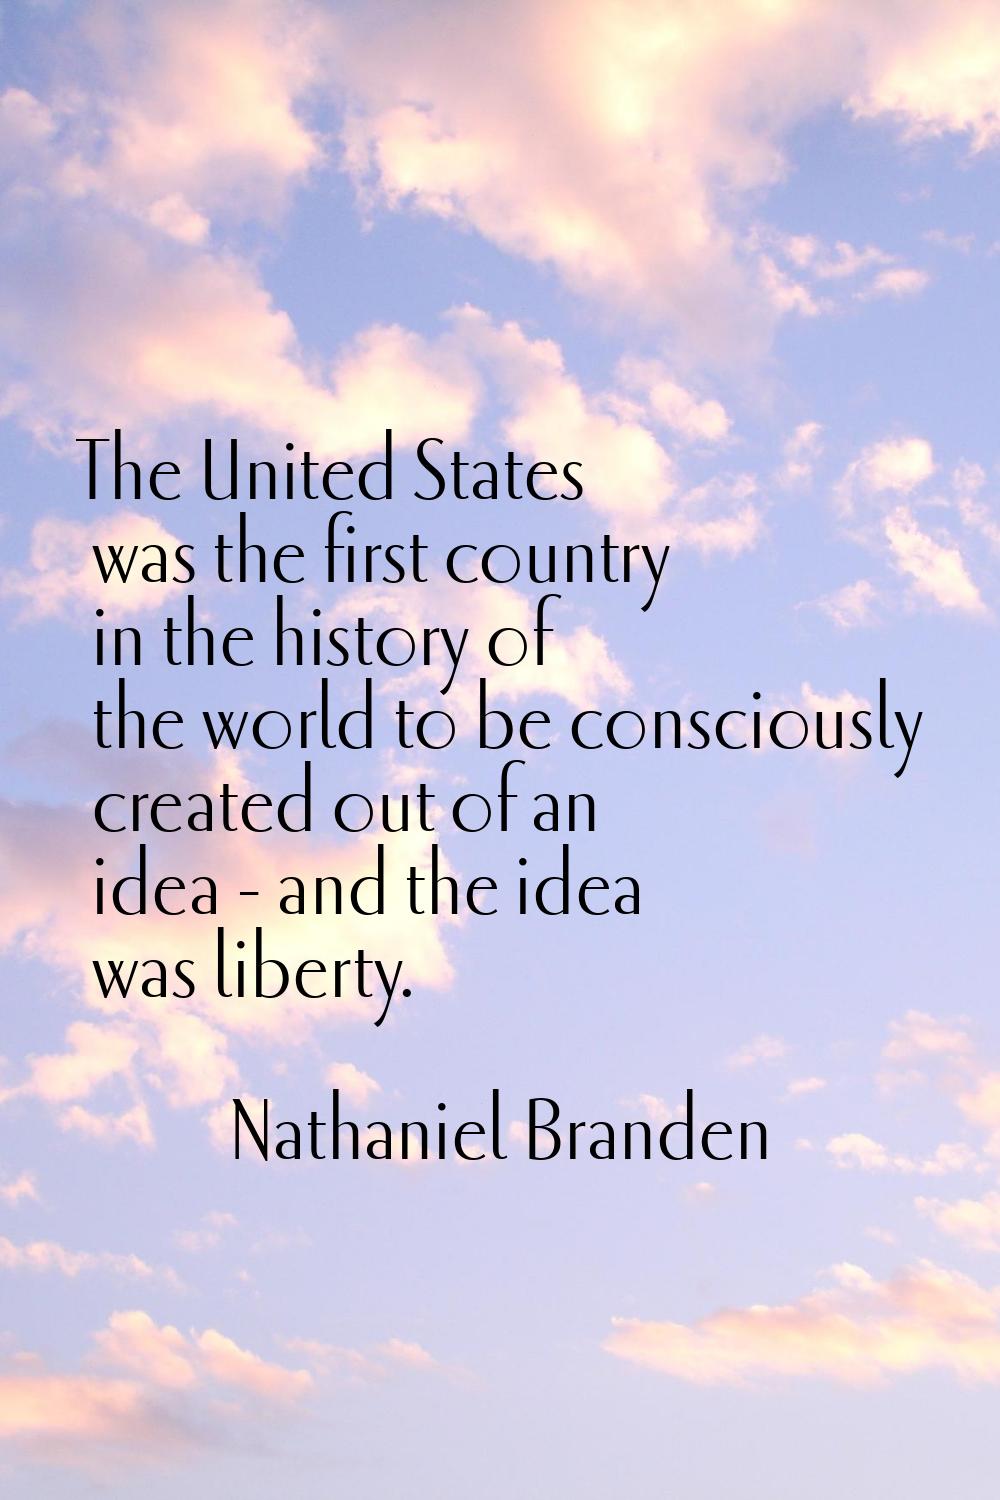 The United States was the first country in the history of the world to be consciously created out o